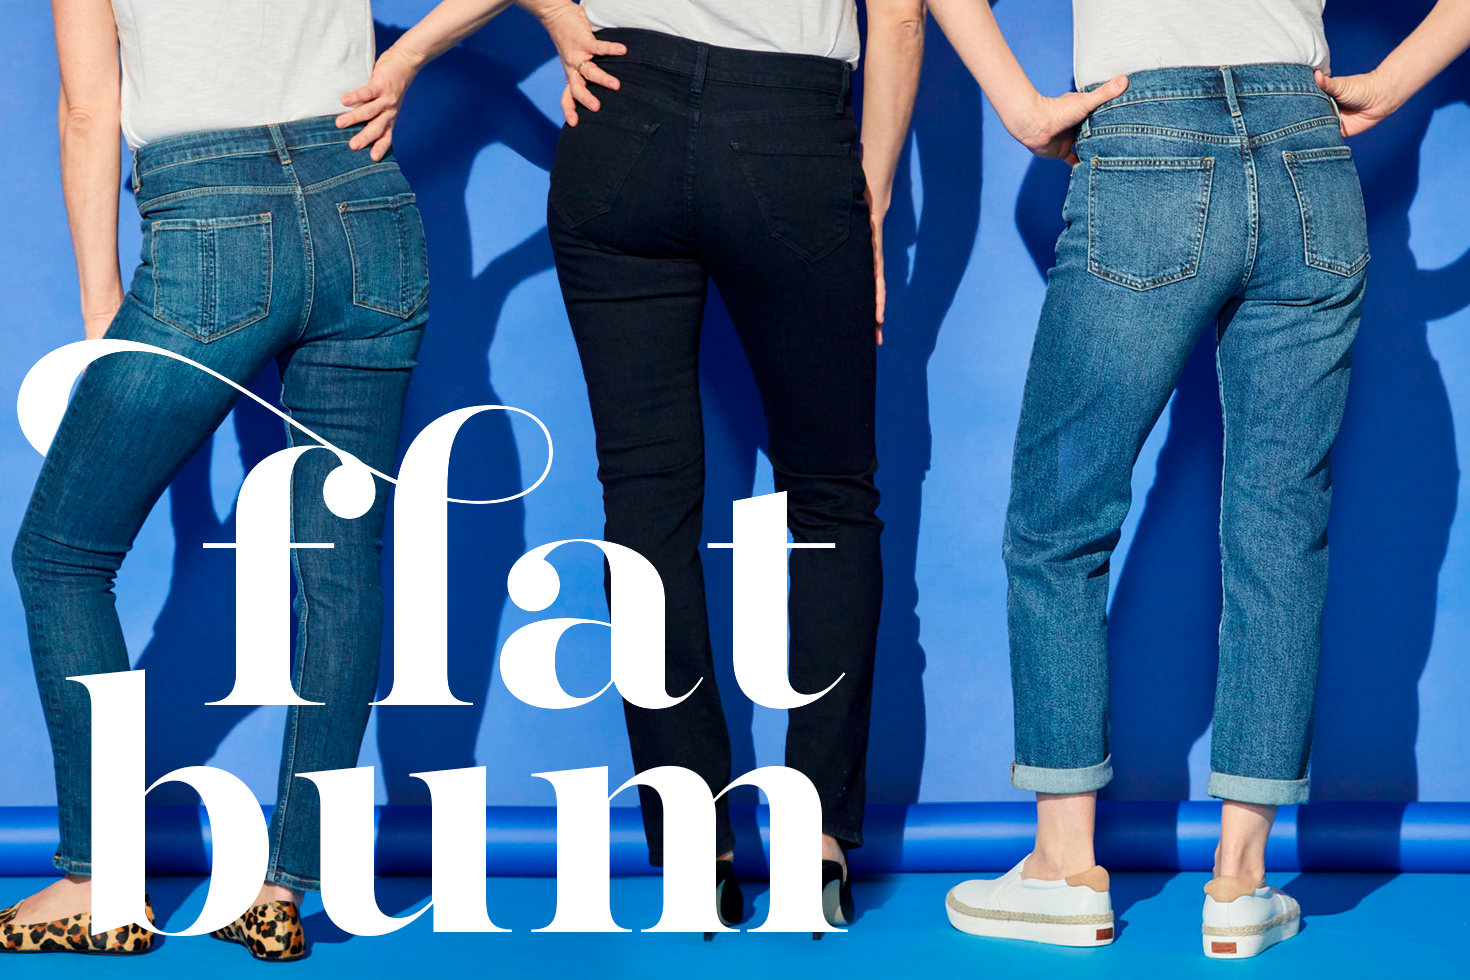 Types of Denim Pants | Types of jeans, Best jeans for women, Jeans style  guide